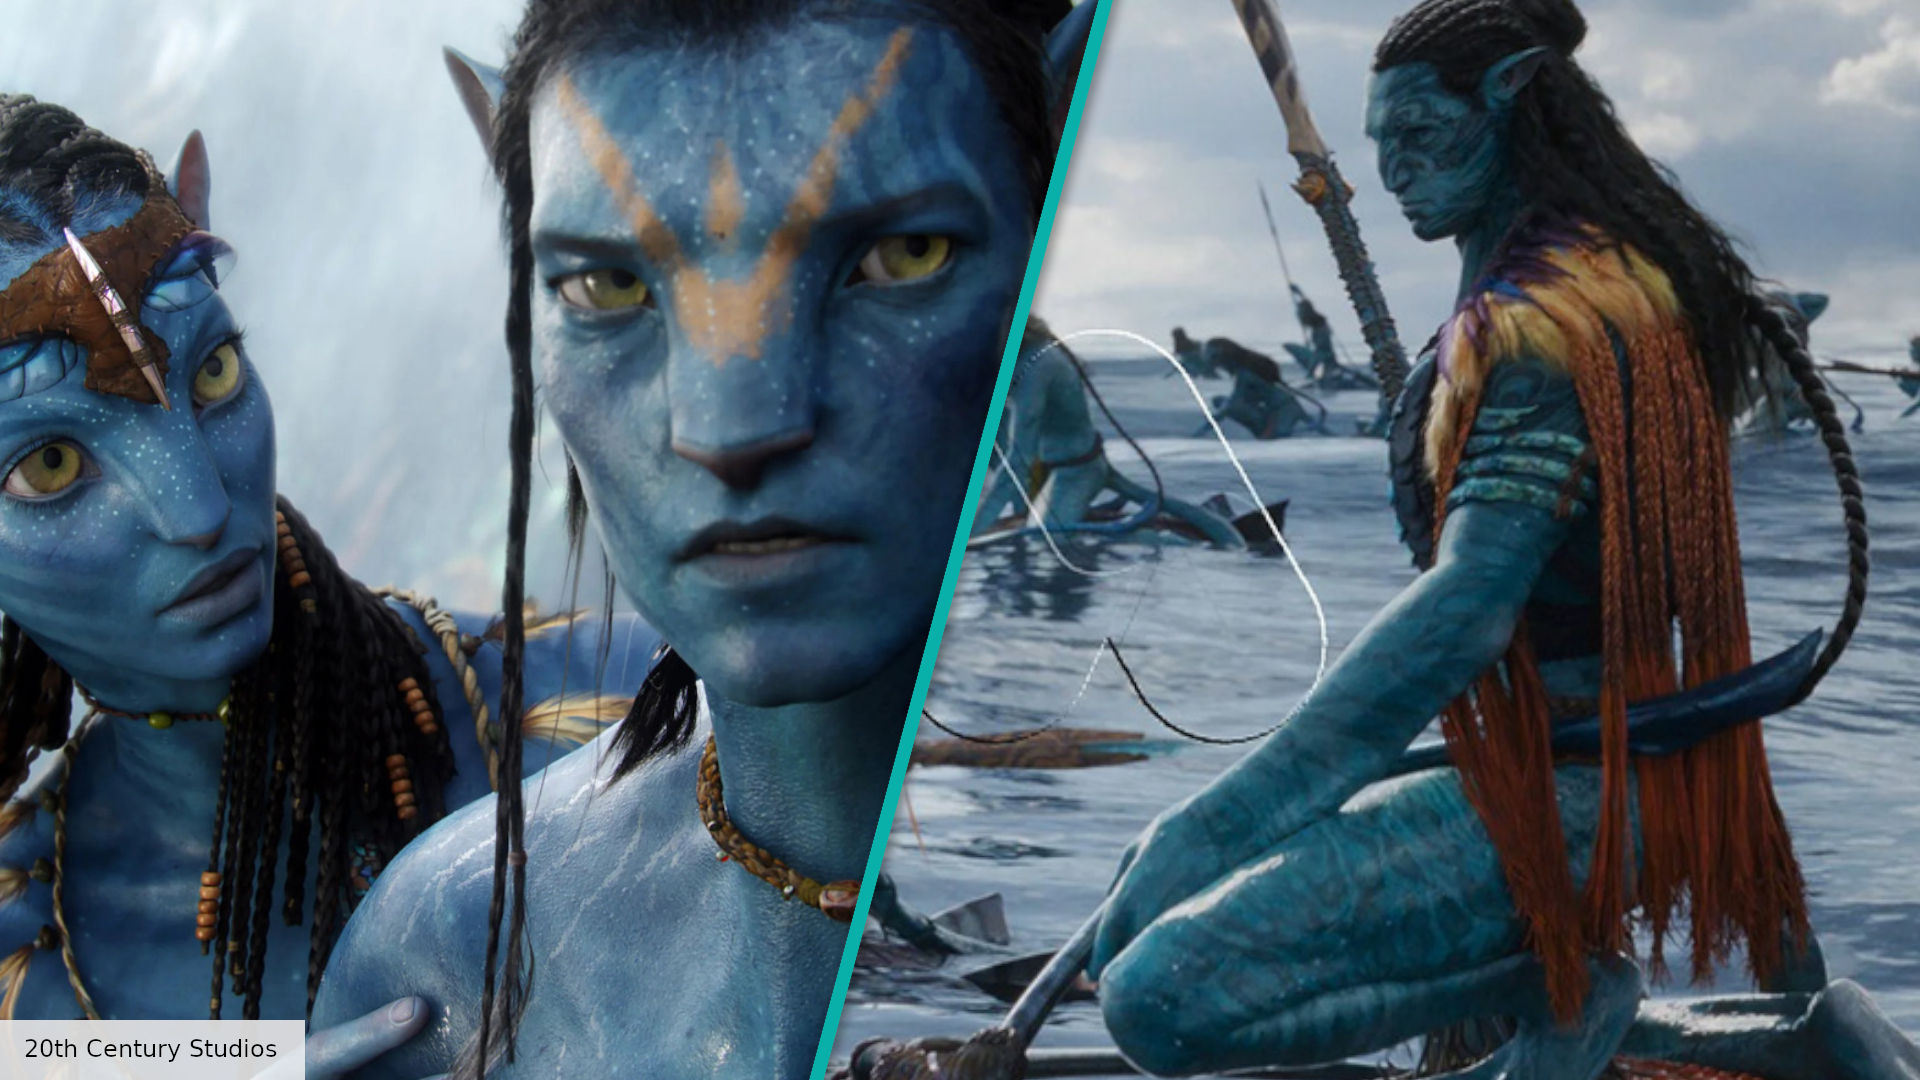 Avatar 2 trailer gets incredible views, are the sceptics wrong?